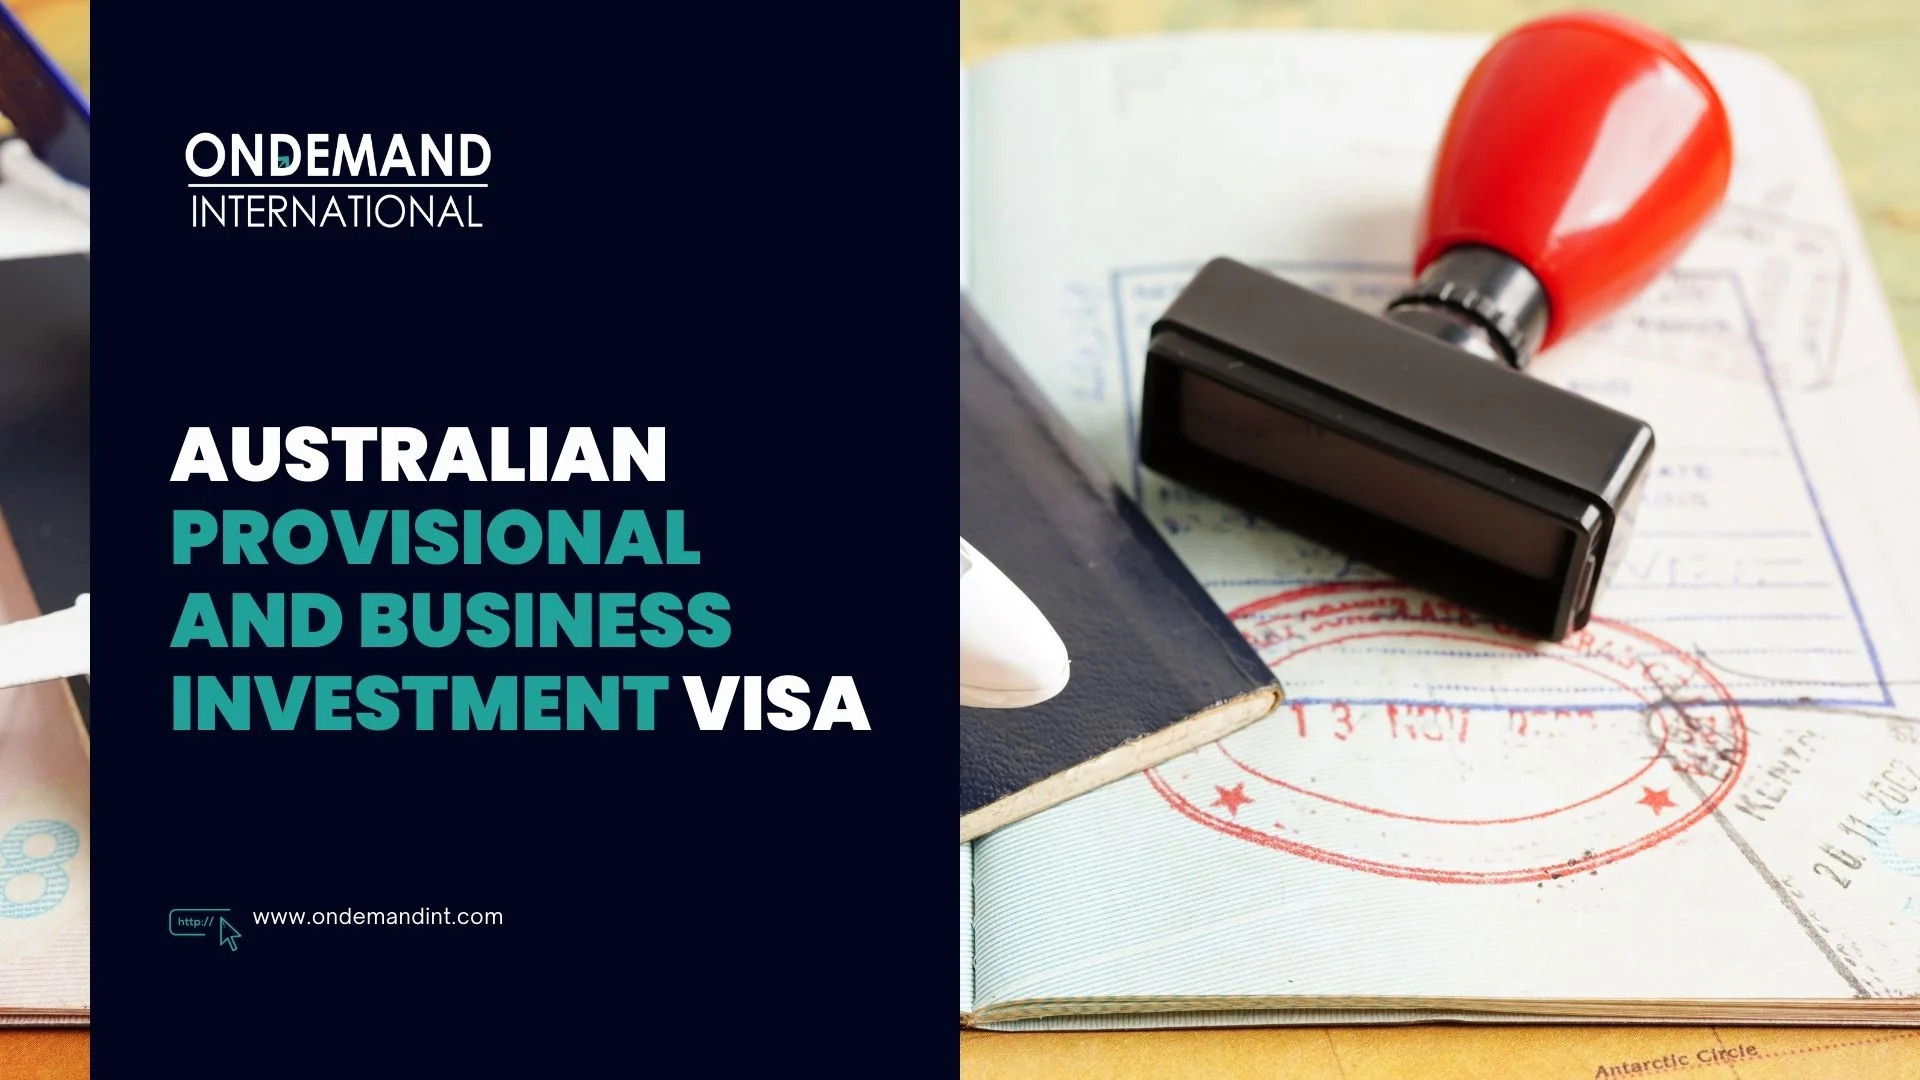 Australian Provisional and Business Investment Visa